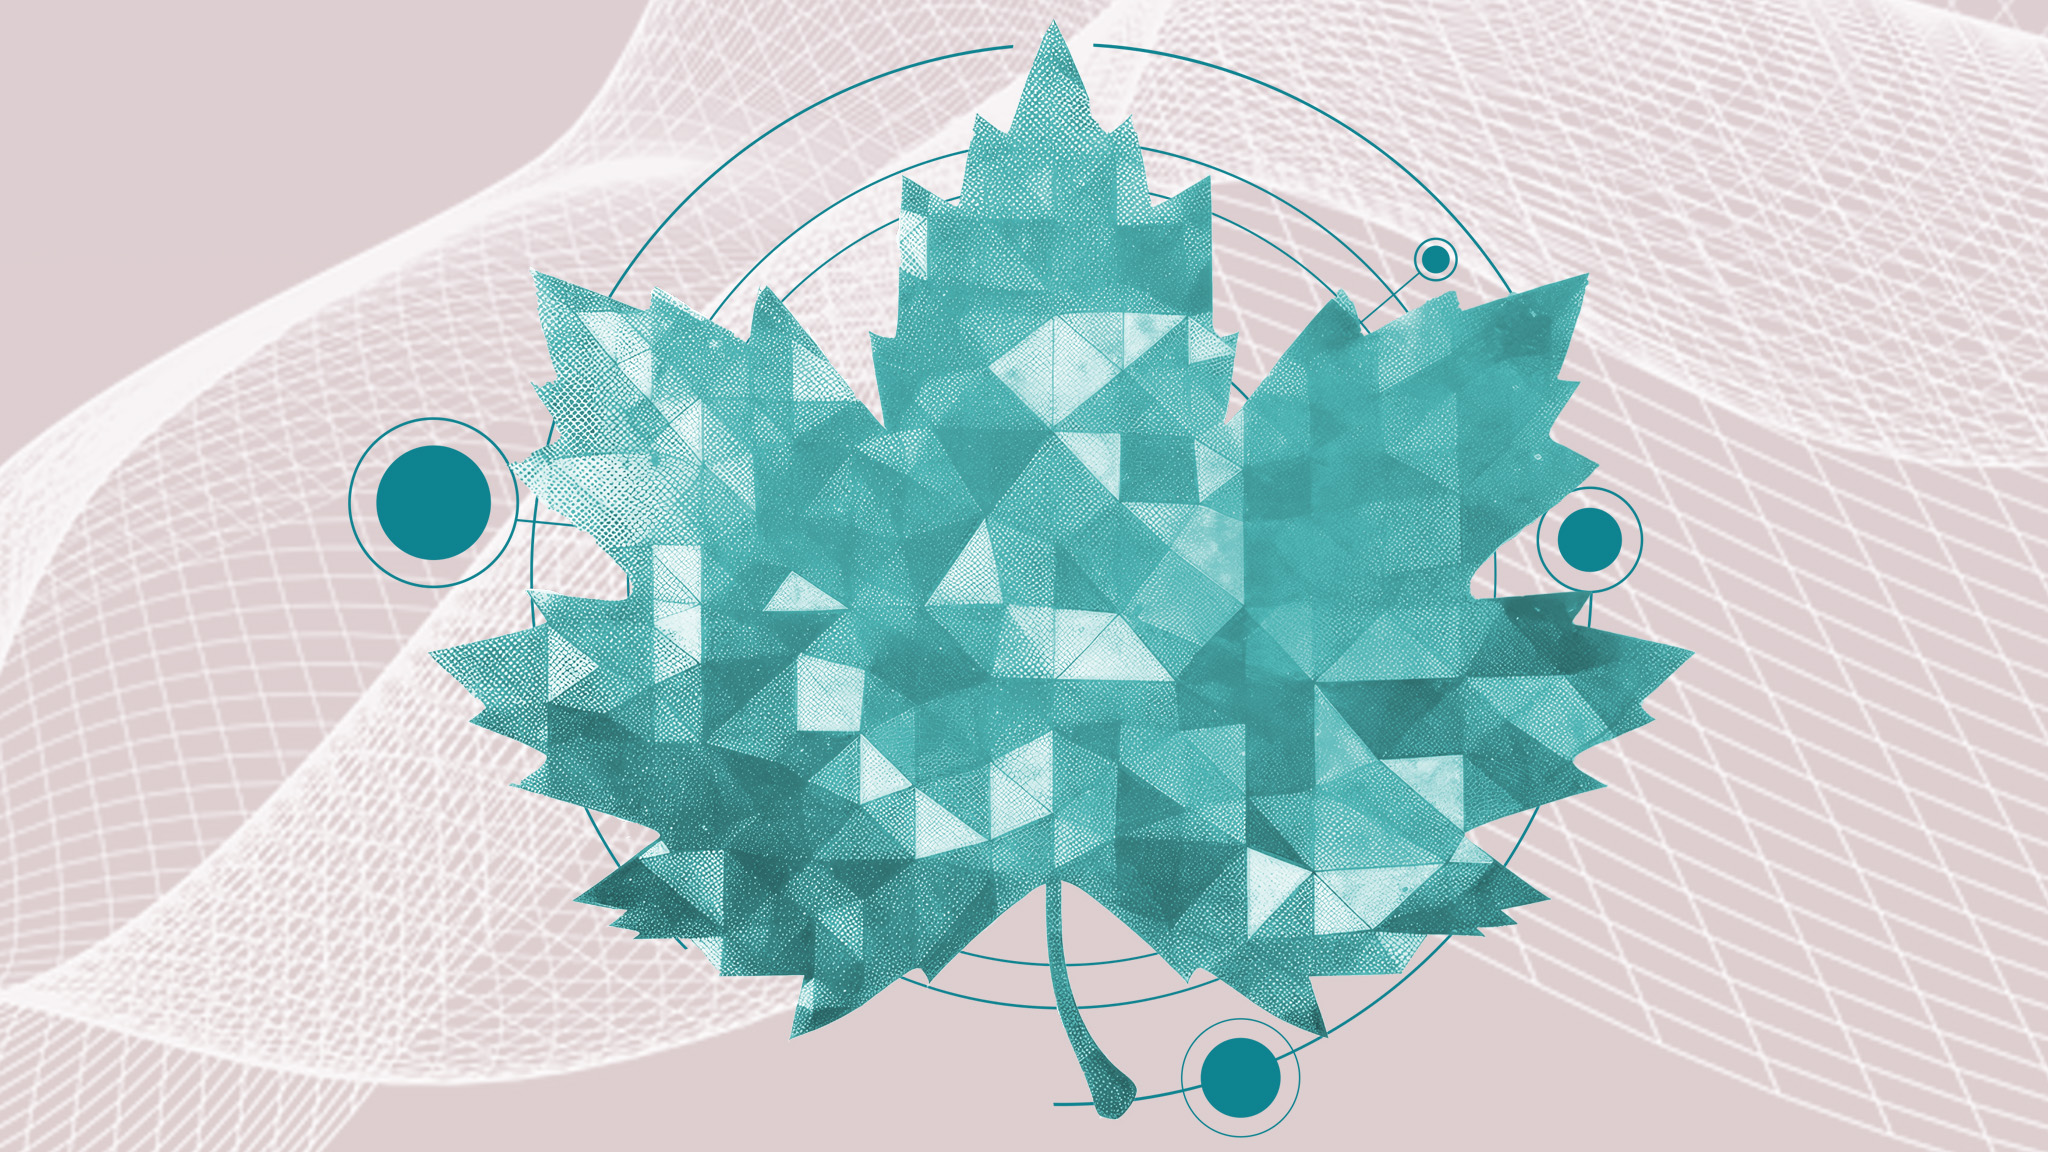 Graphic design of a textured maple leaf against network swirls